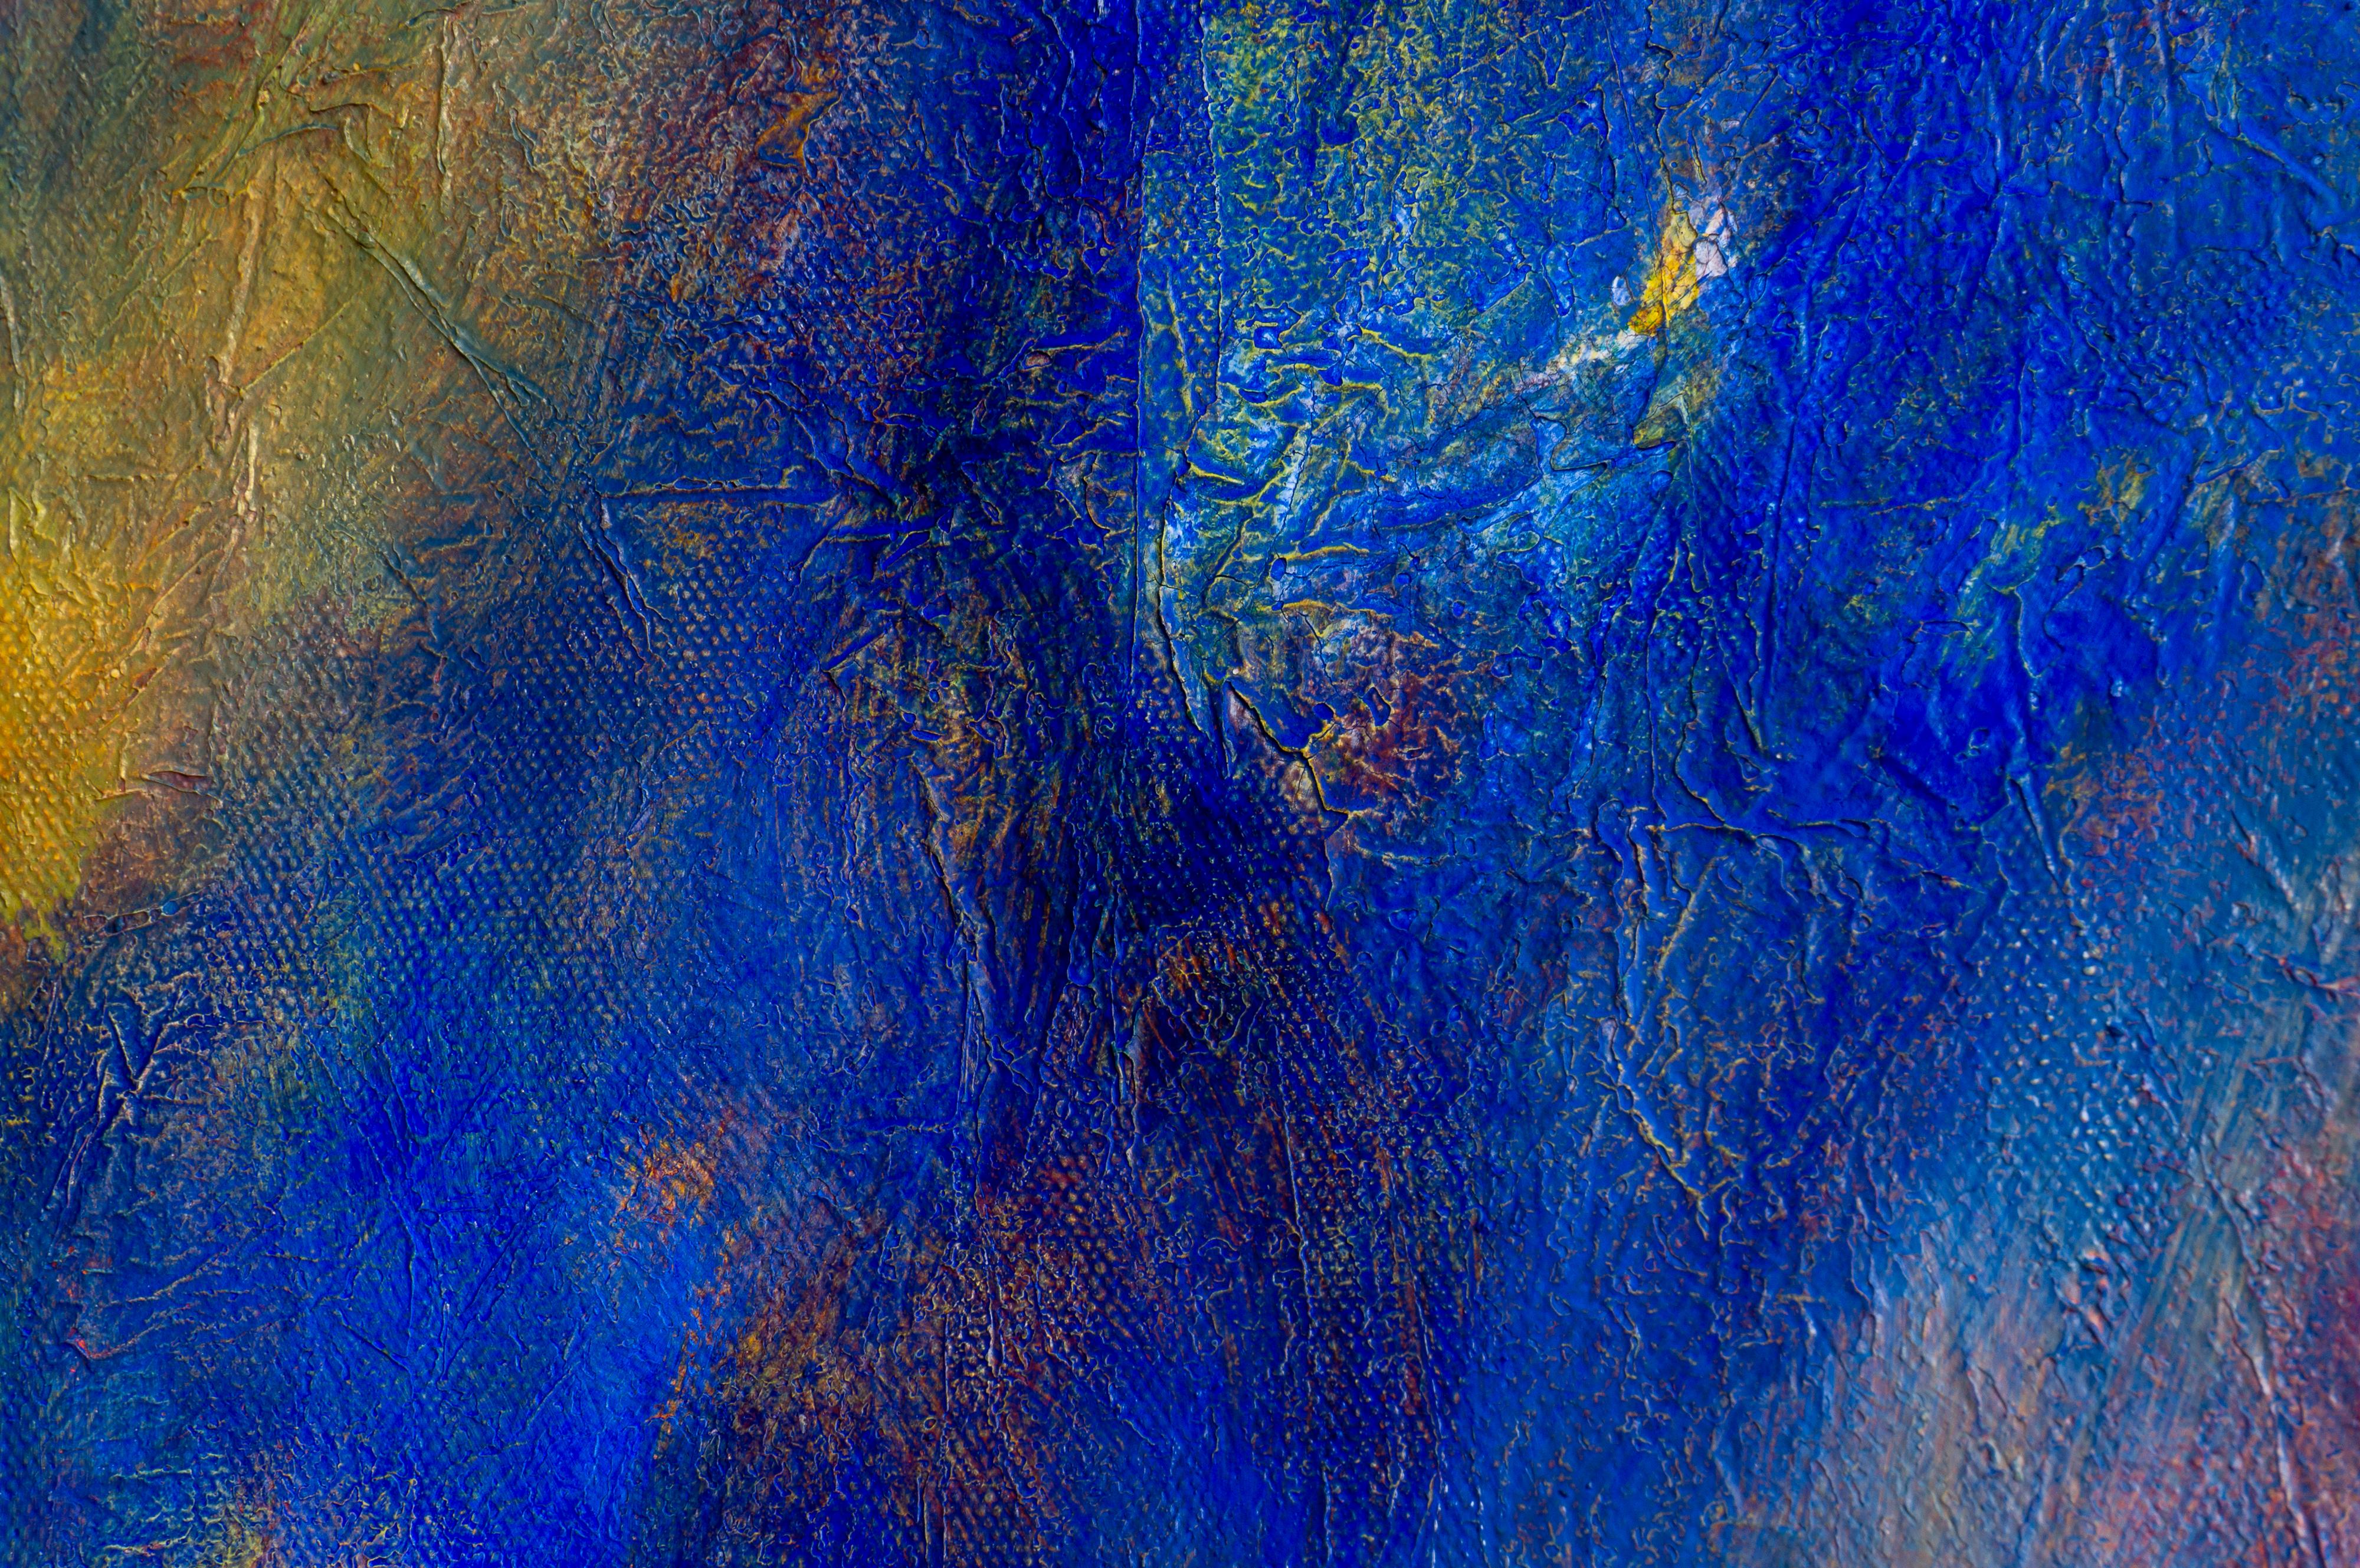 SURREAL Figurative Painting “Night in the Andes” in blue tones, mixed texture For Sale 10